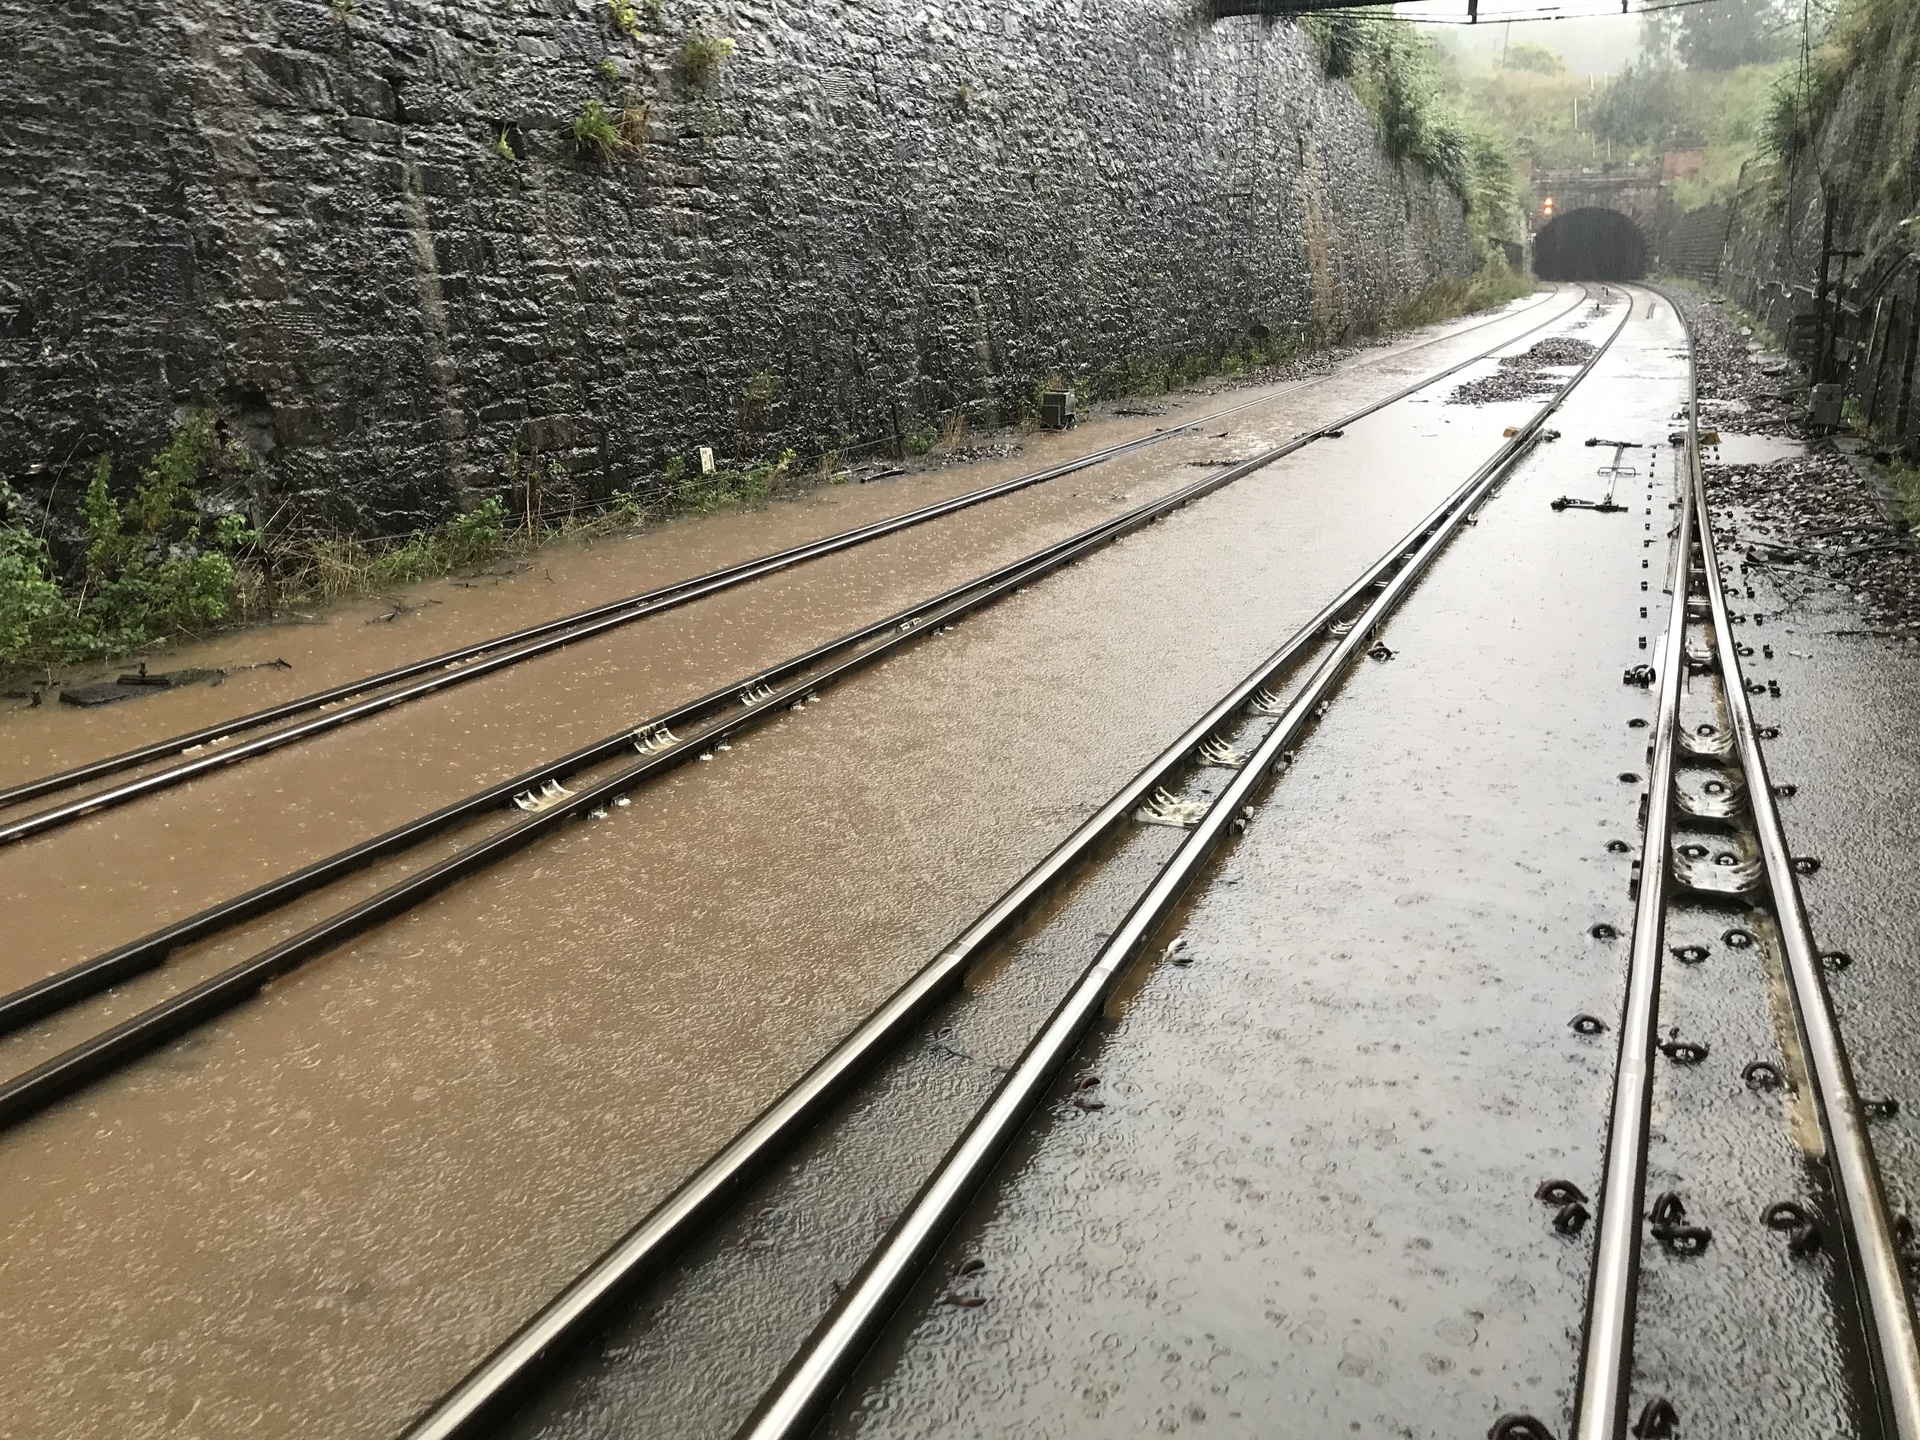 Images from Network Rail show the extent of the damage to the tracks